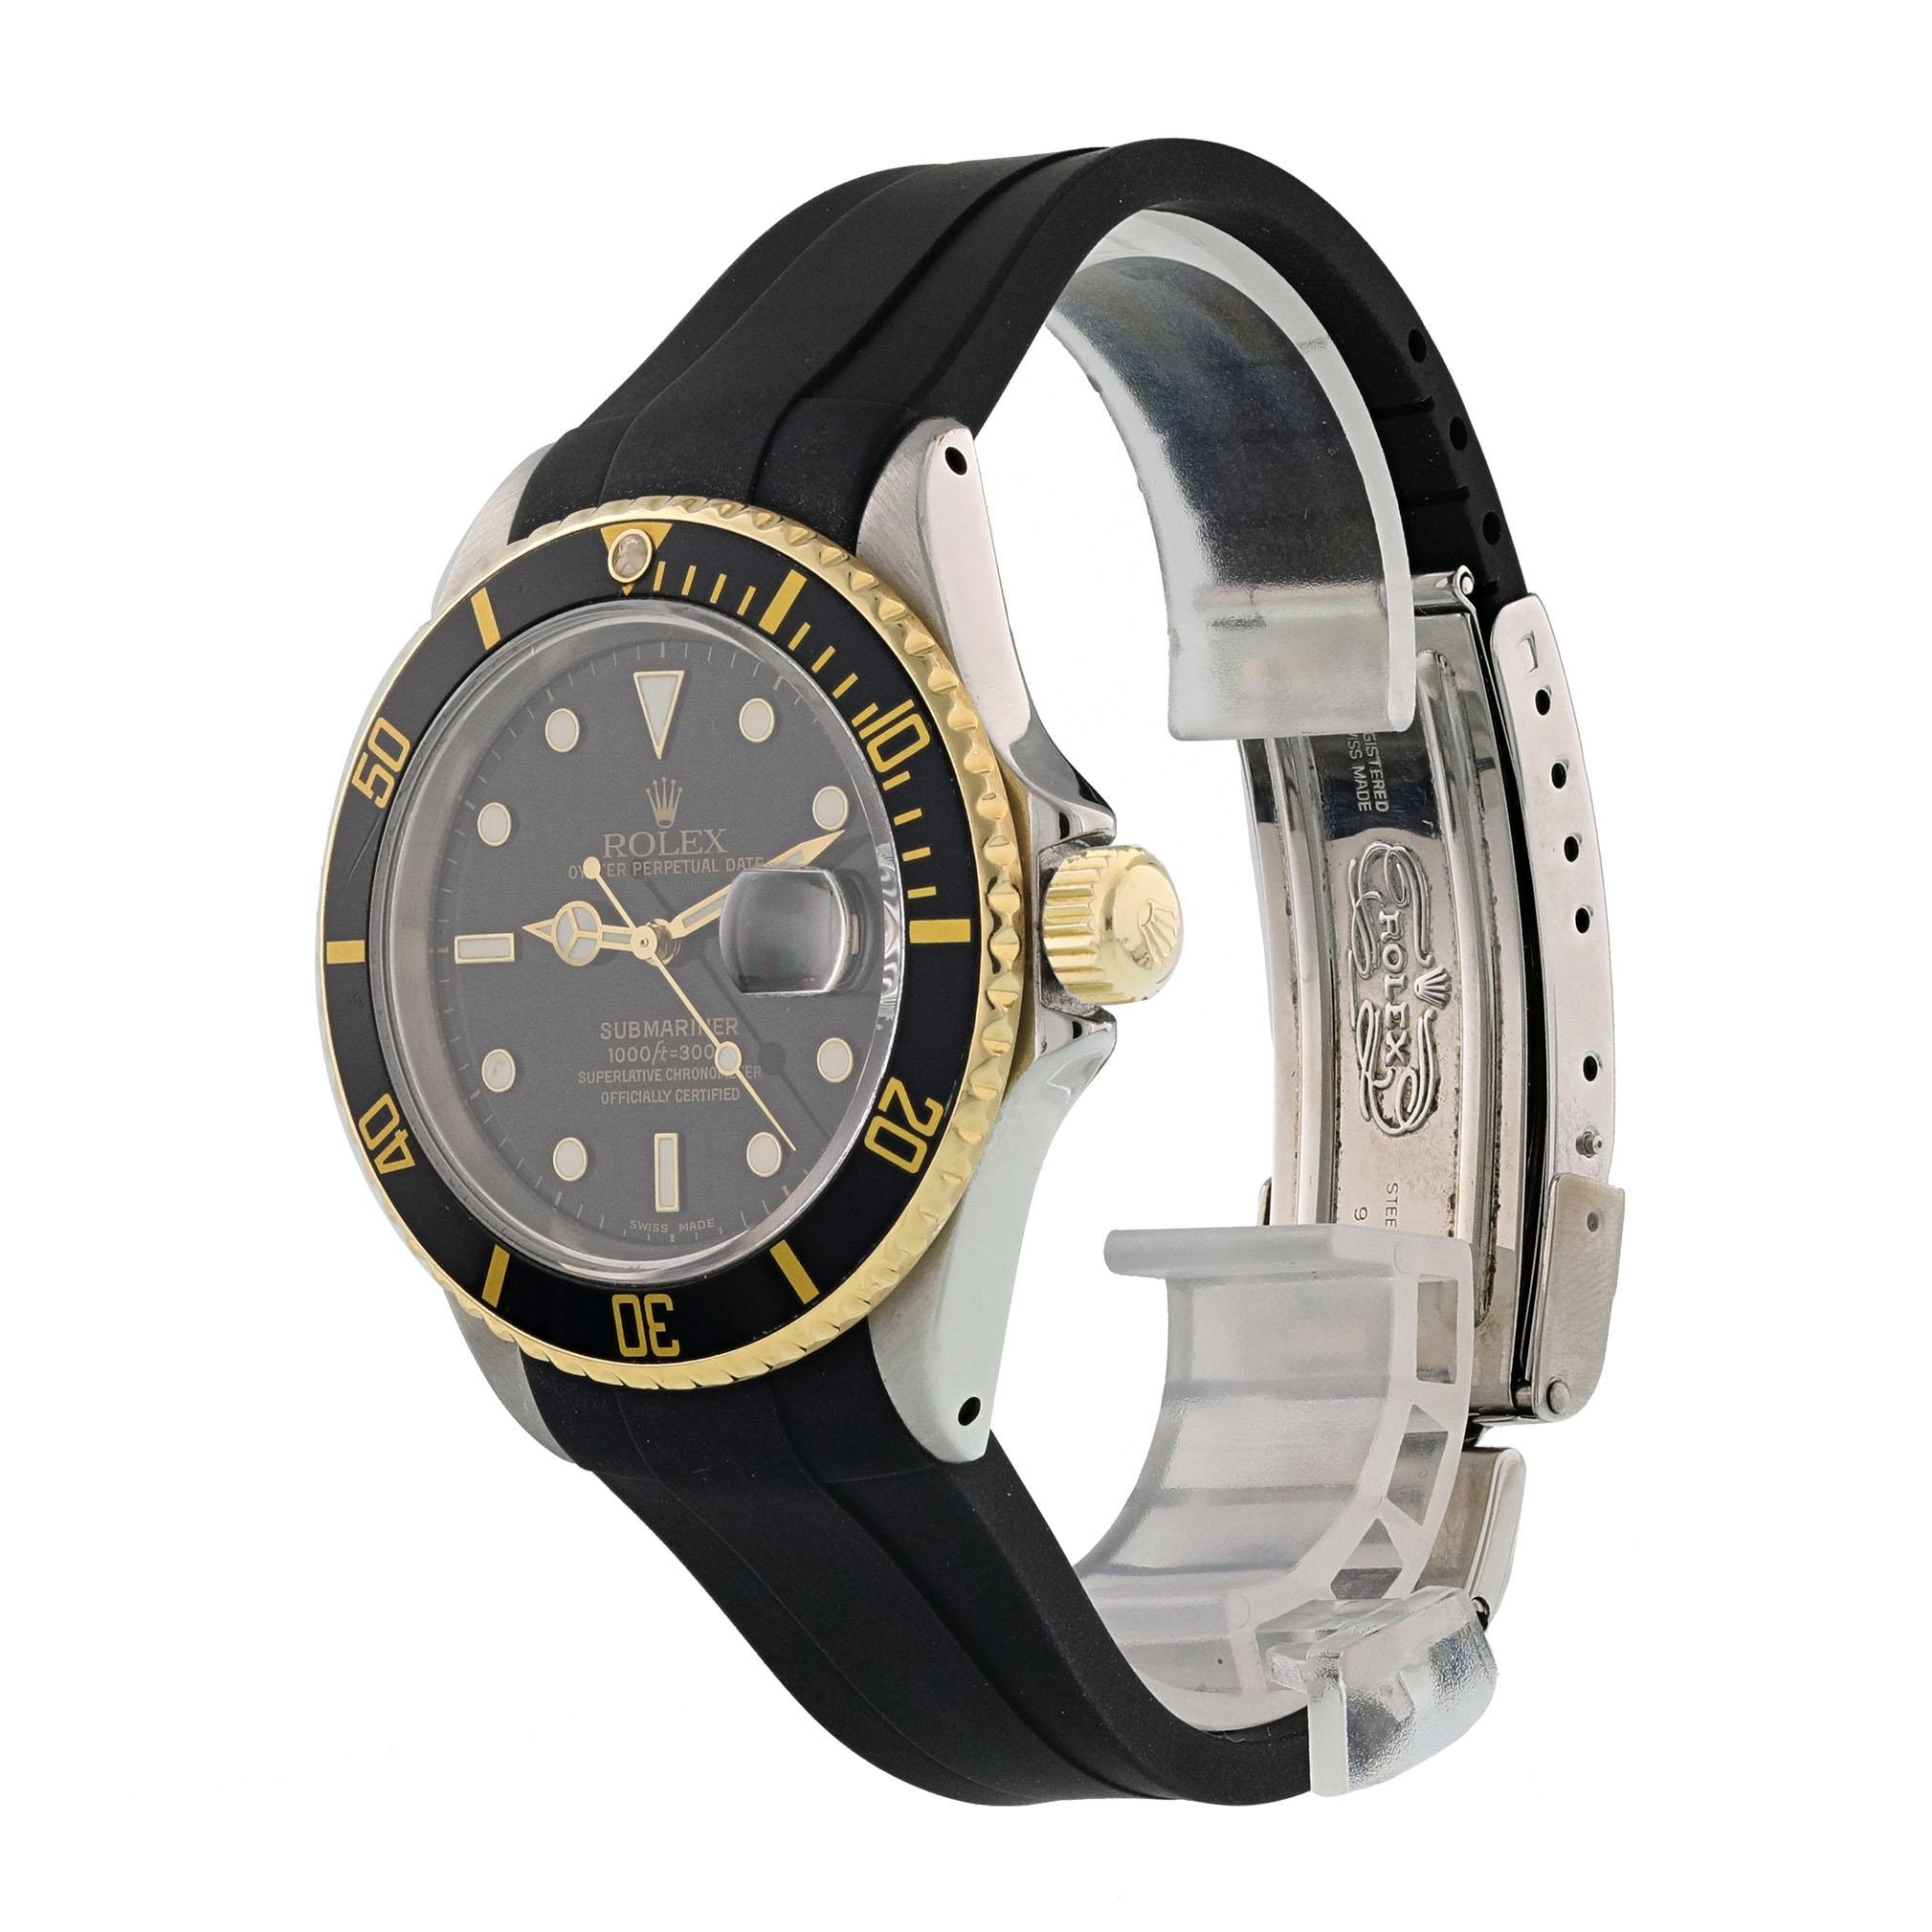 Rolex Submariner 16613 Men's Watch.
40mm Stainless Steel case. 
Yellow Gold Unidirectional bezel. 
Black dial with luminous gold hands and index, dot hour markers. 
Minute markers on the outer dial. 
Date display at the 3 o'clock position. 
Rubber B